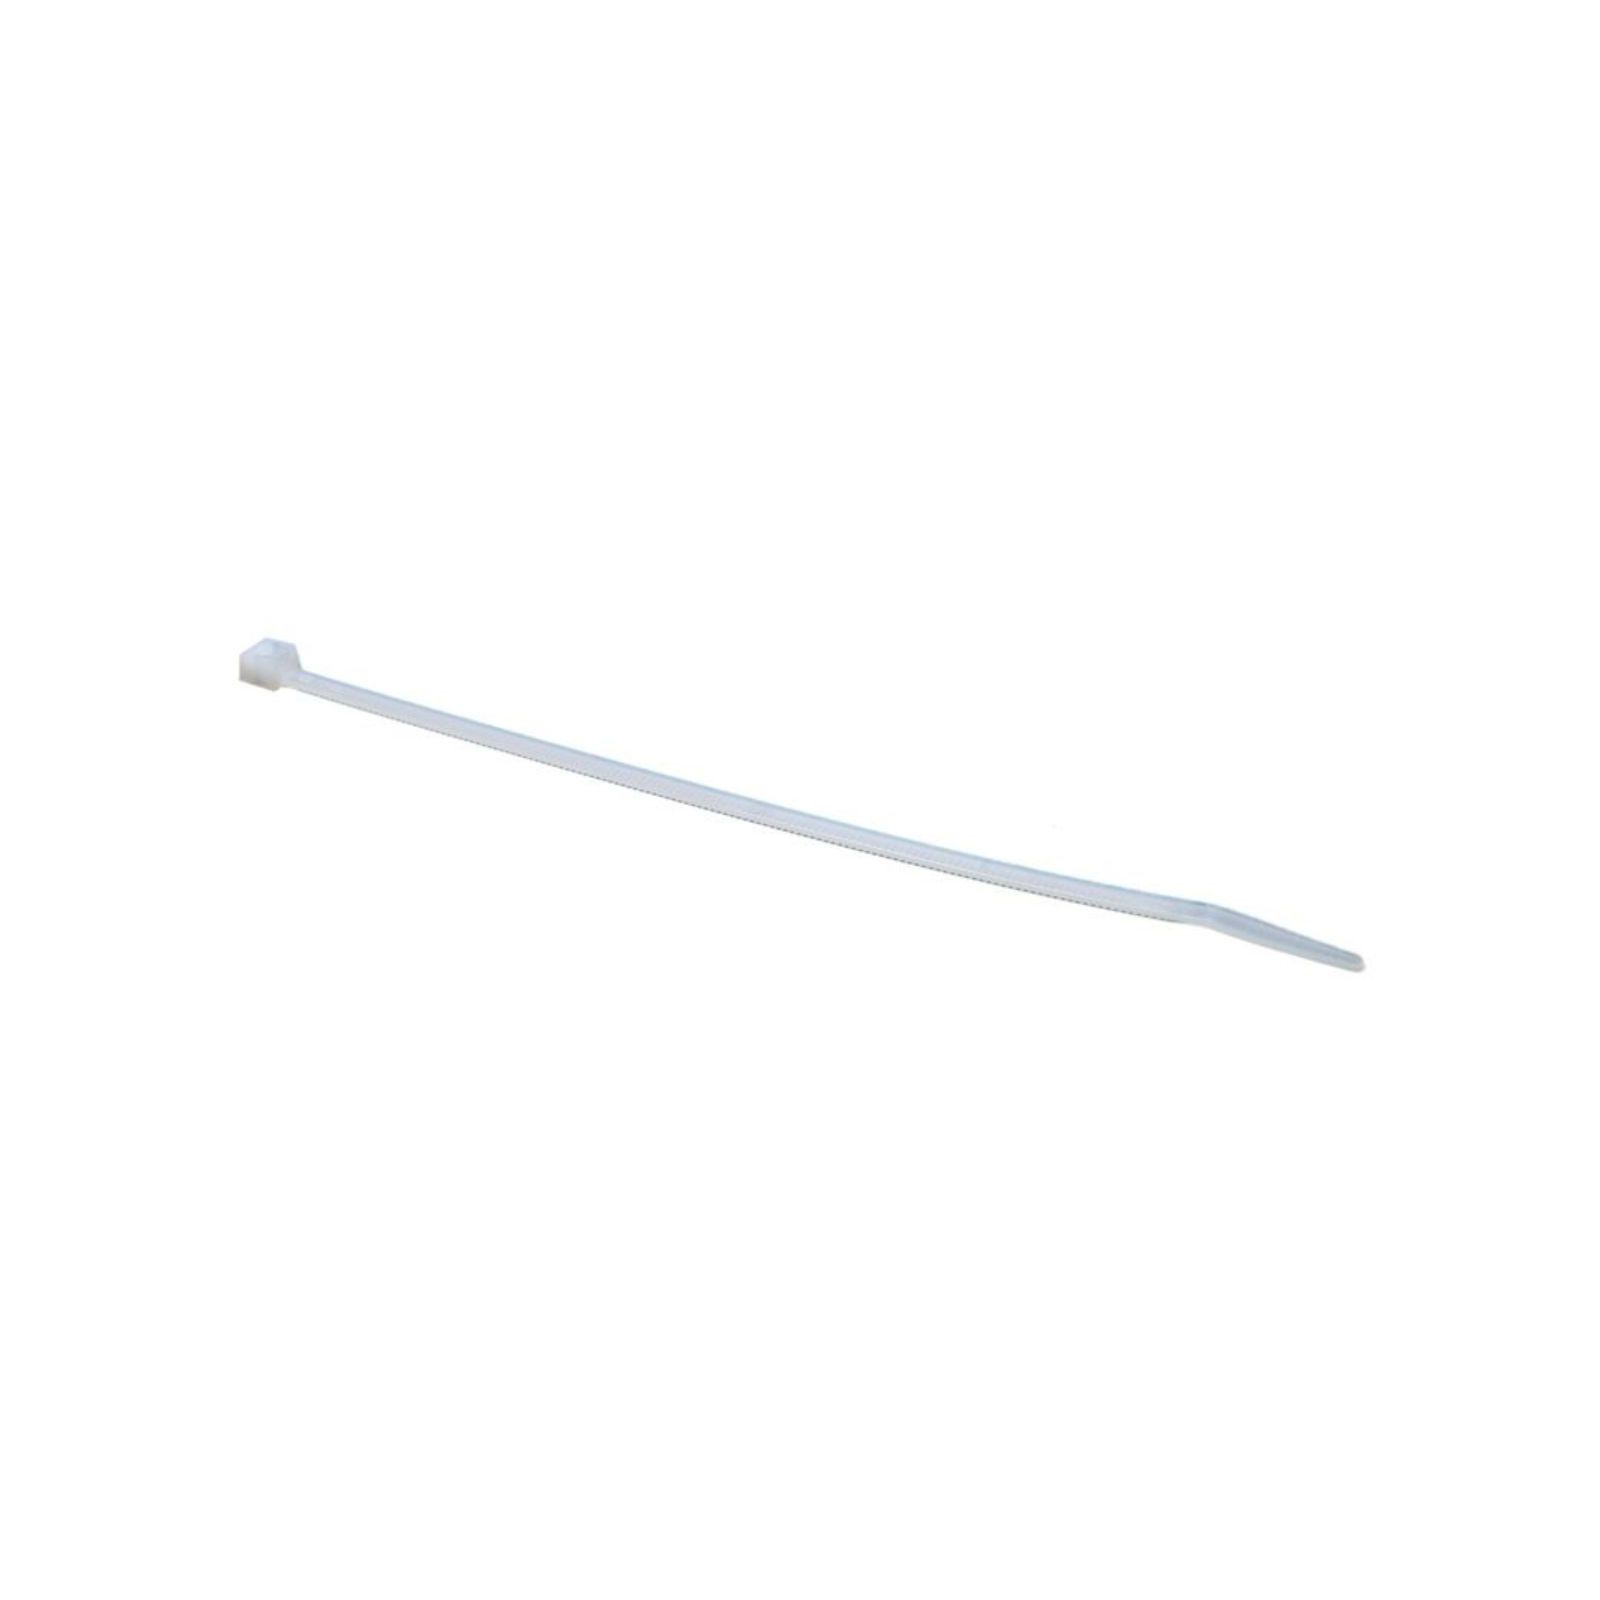 PROTECH 455065 - 5 3/4" Wire & Cable Ties - Nylon Natural, Bag of 100